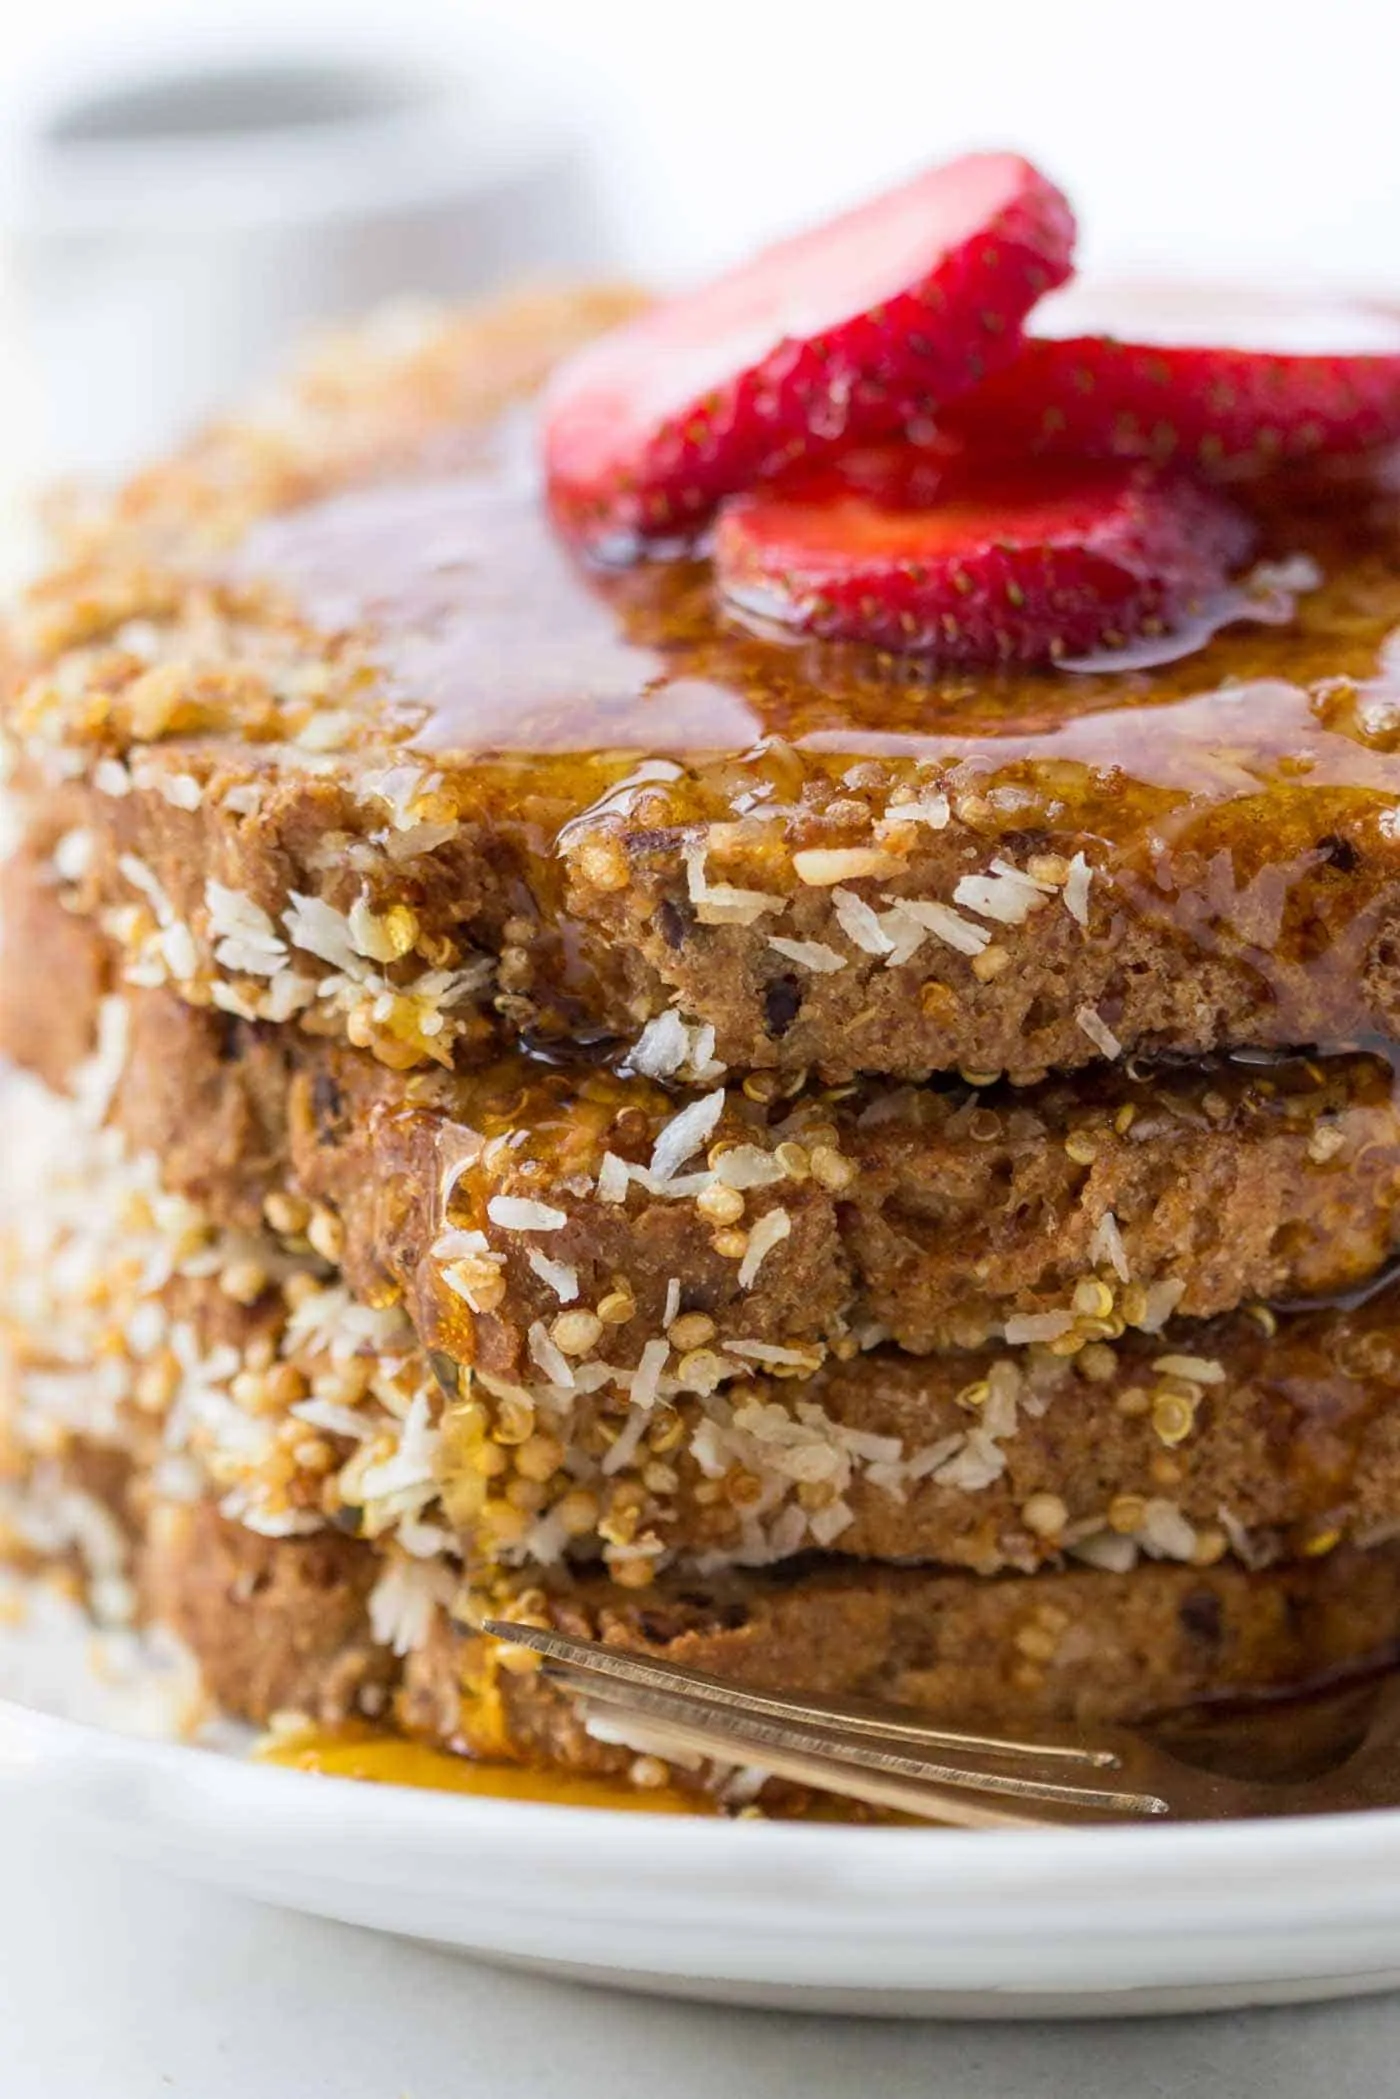 VEGAN FRENCH TOAST crusted in coconut and quinoa...so simple and just the most decadent way to star the day!